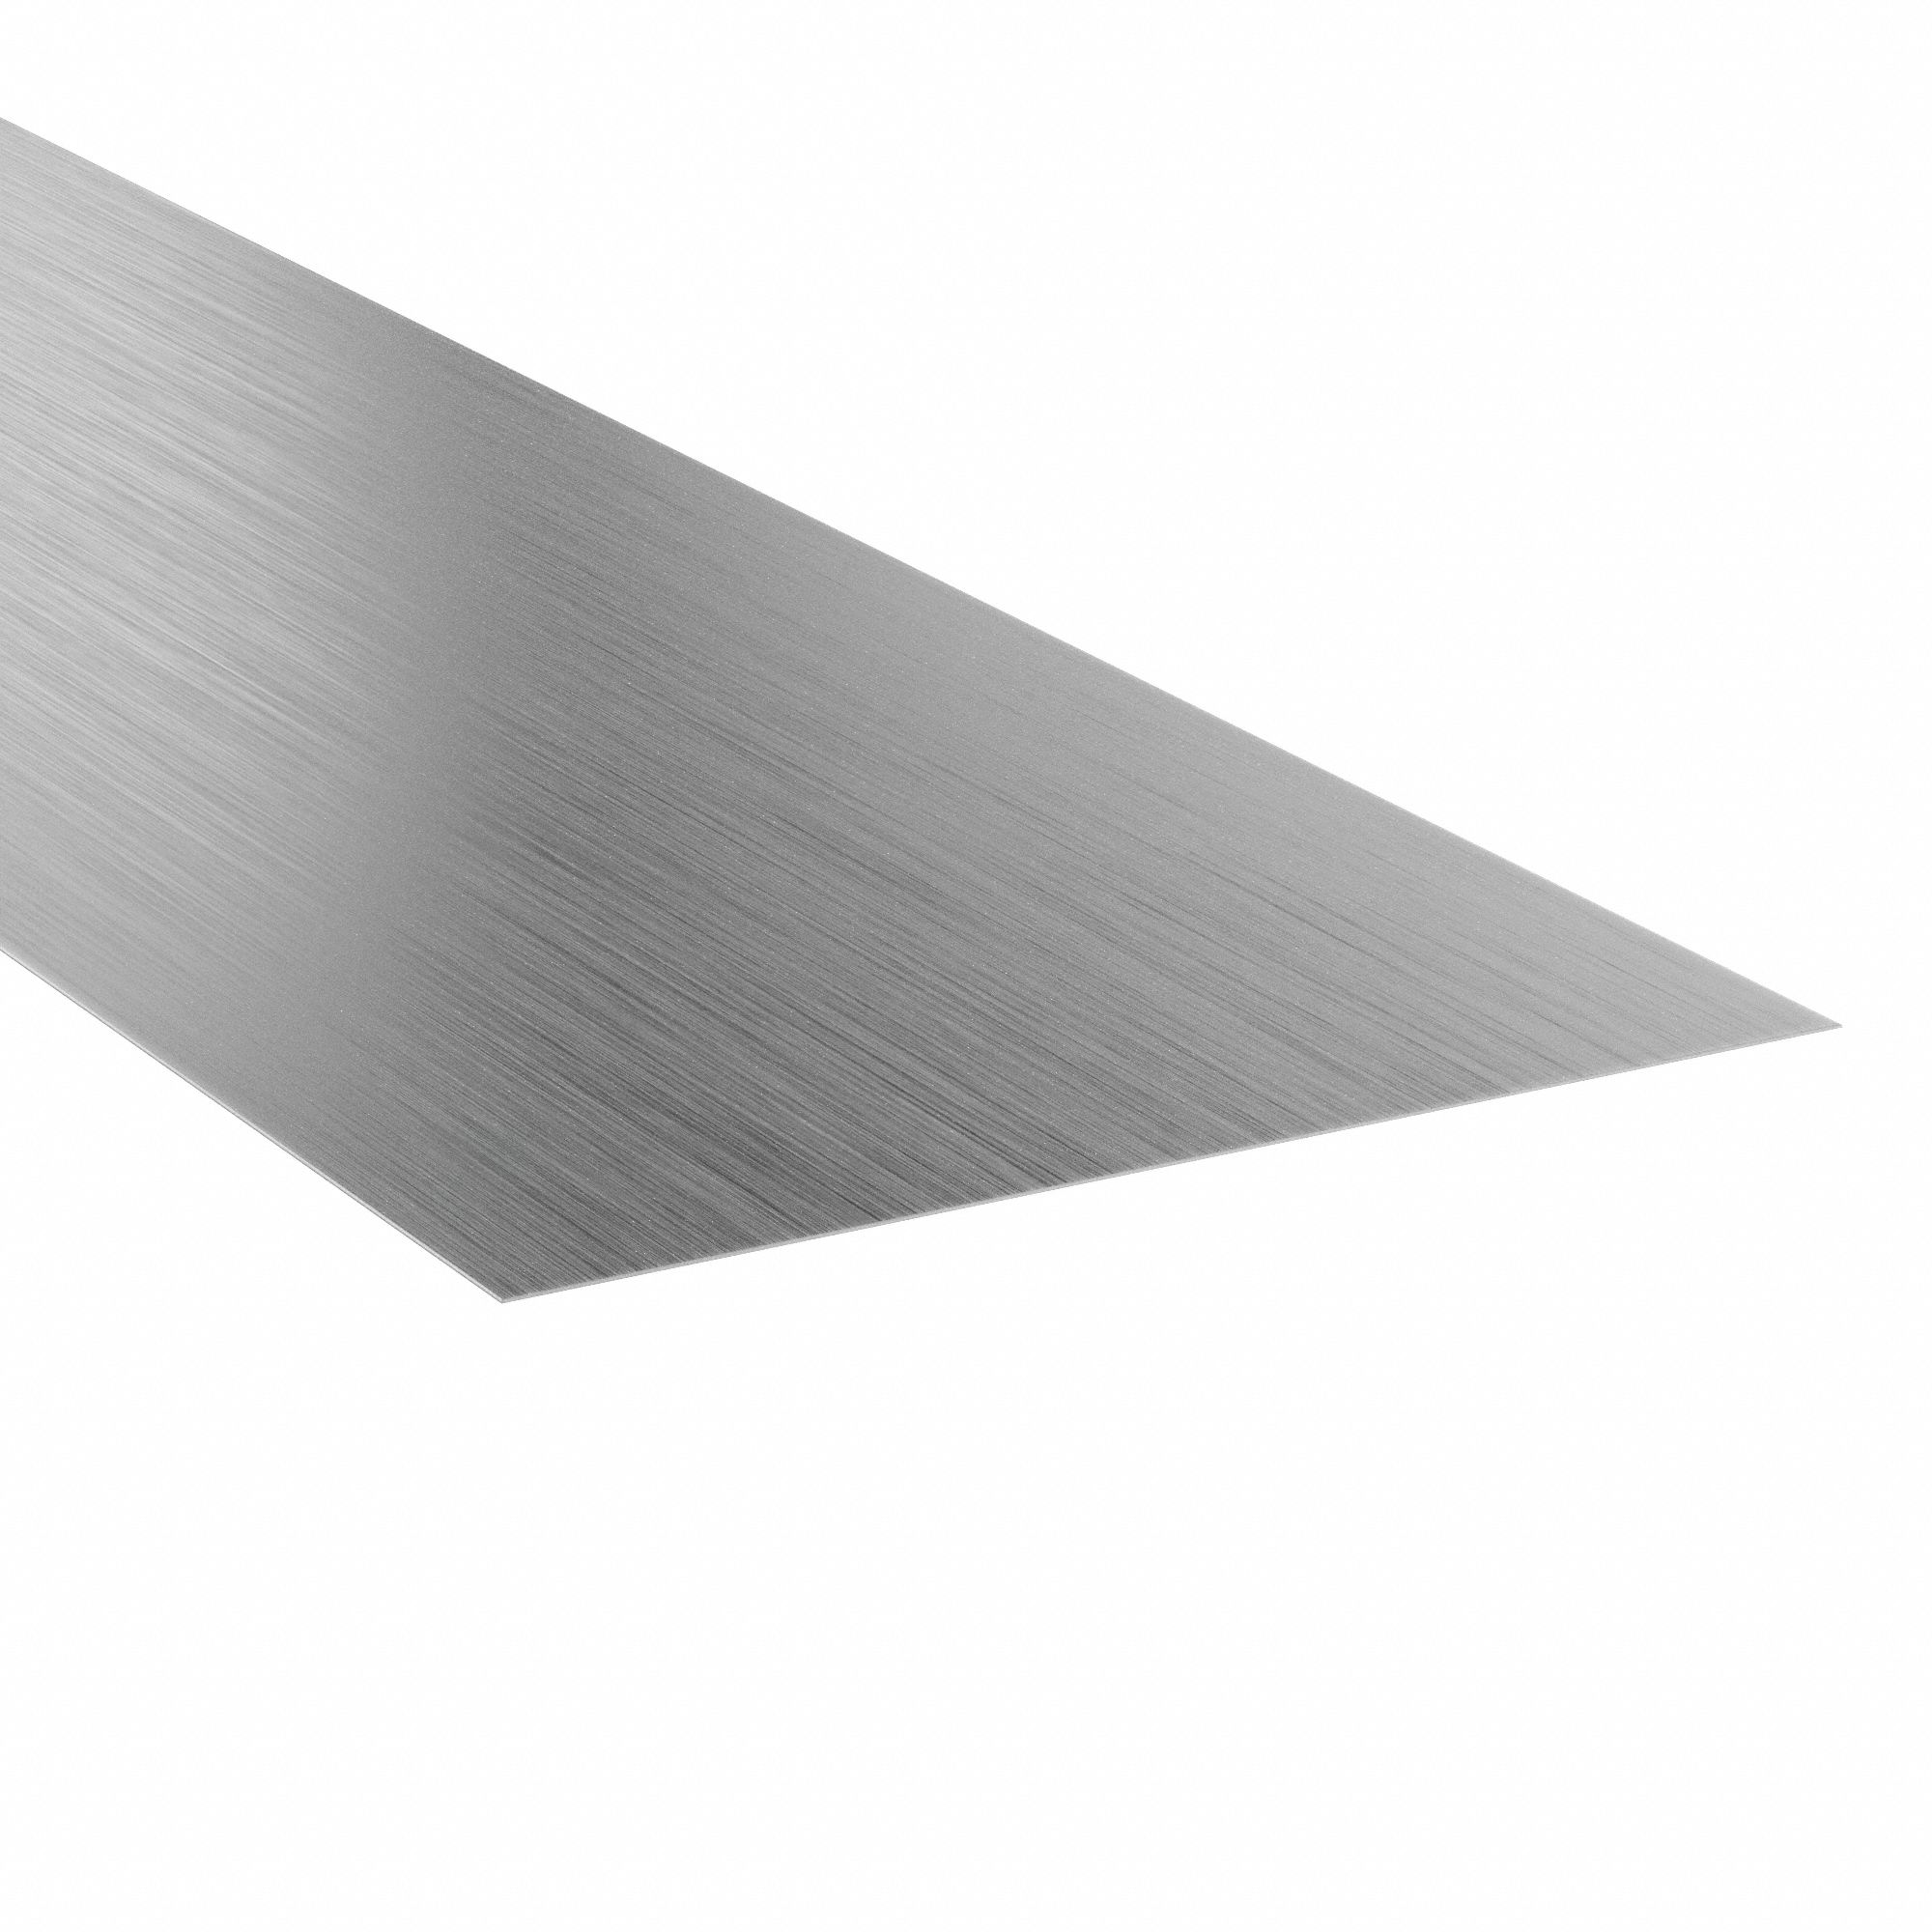 1095 Carbon Steel Sheet: 0.032 in Thick, +/-0.001 in, 10 in x 24 in Nominal  Size (WxL), Mill